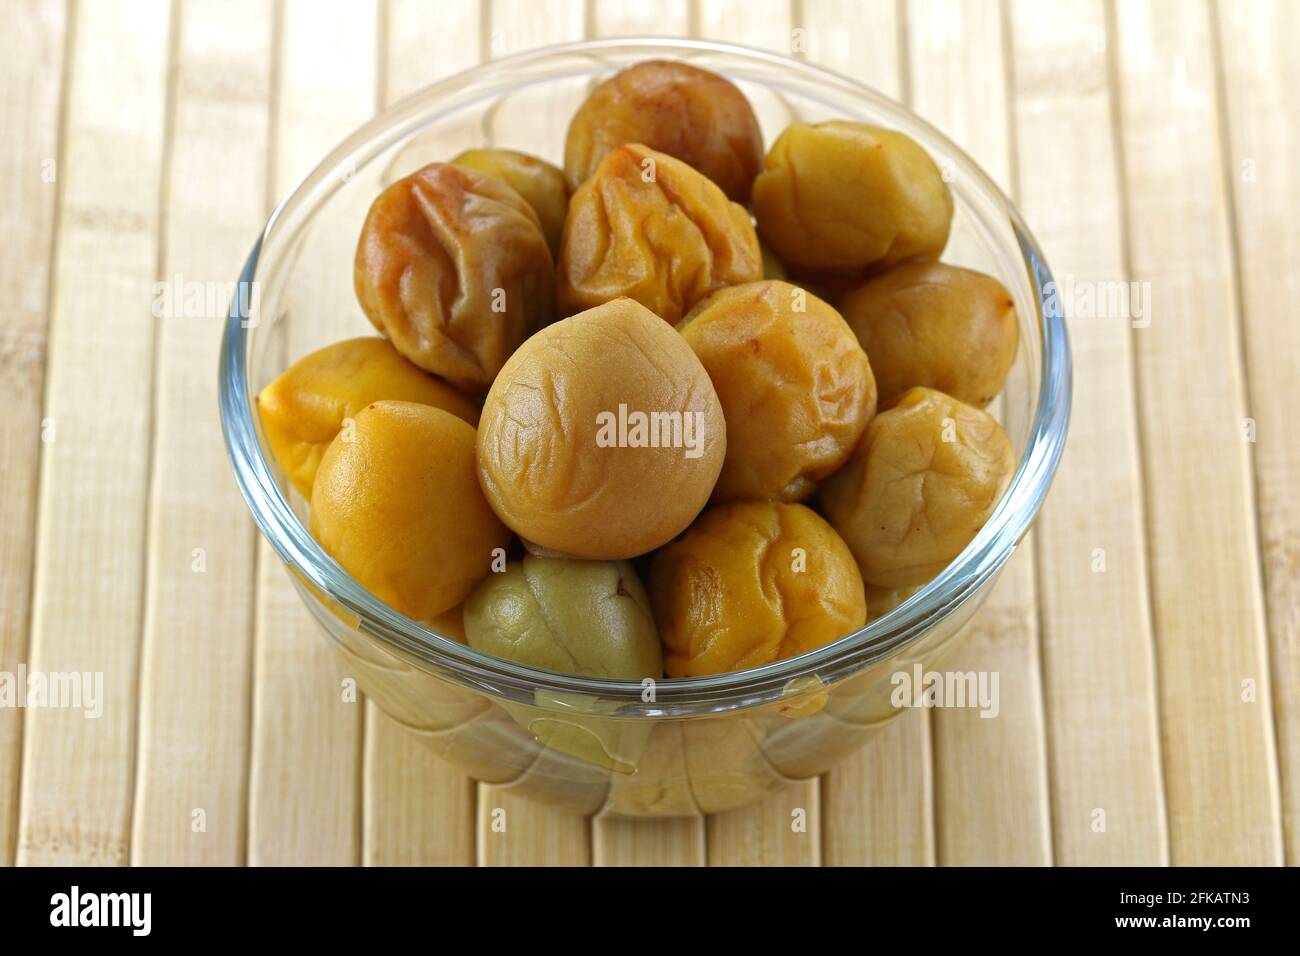 A bowl of pickled peach (Chinese plum, Japanese apricot), on a wooden mat Stock Photo